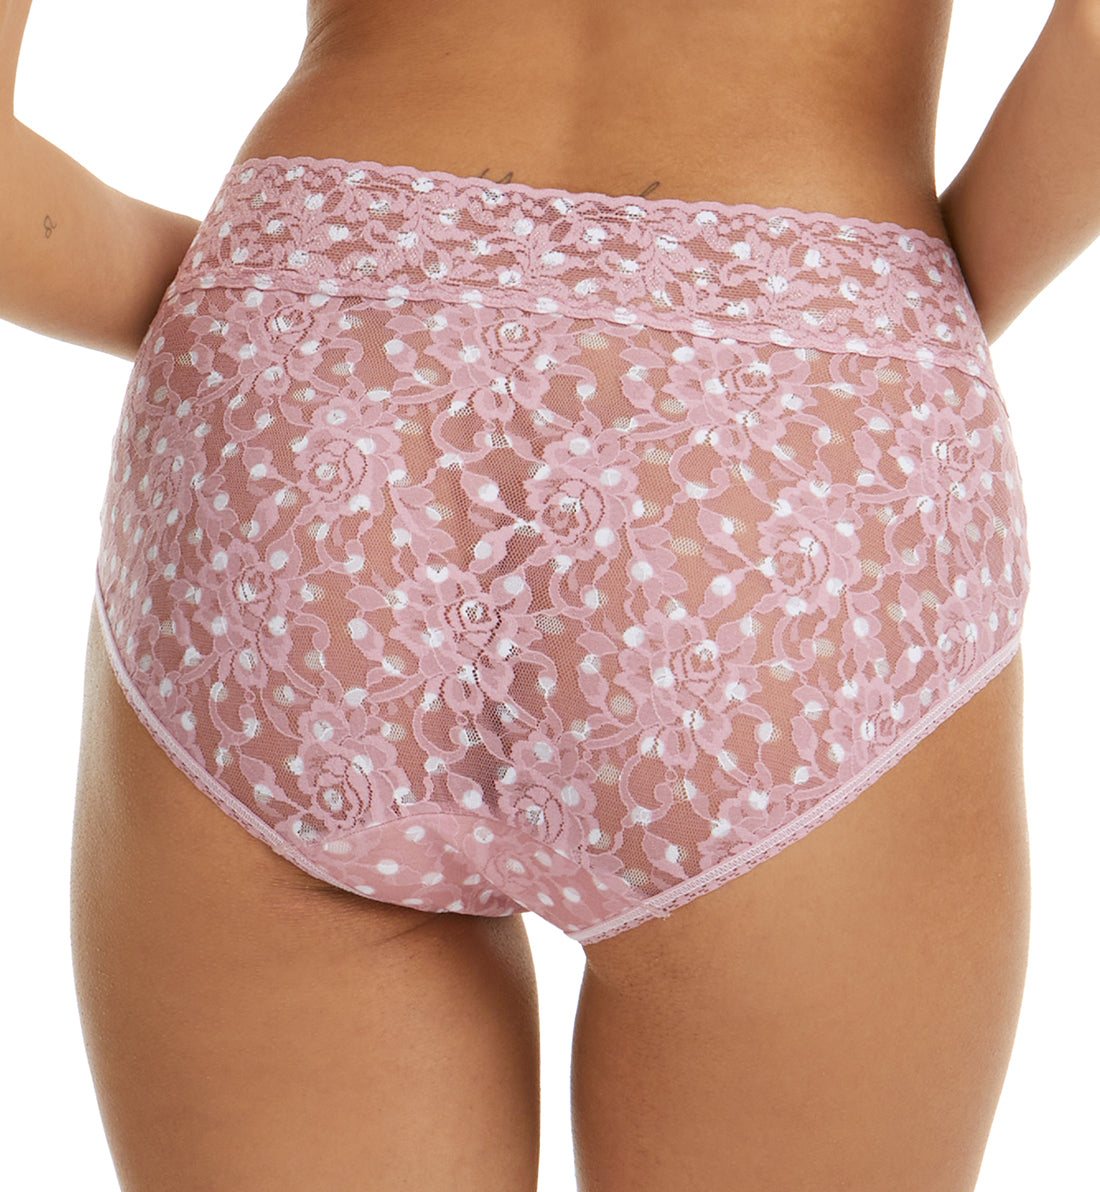 Hanky Panky Signature Lace Printed French Brief (PR461),Small,Pink Frosting - Pink Frosting,Small